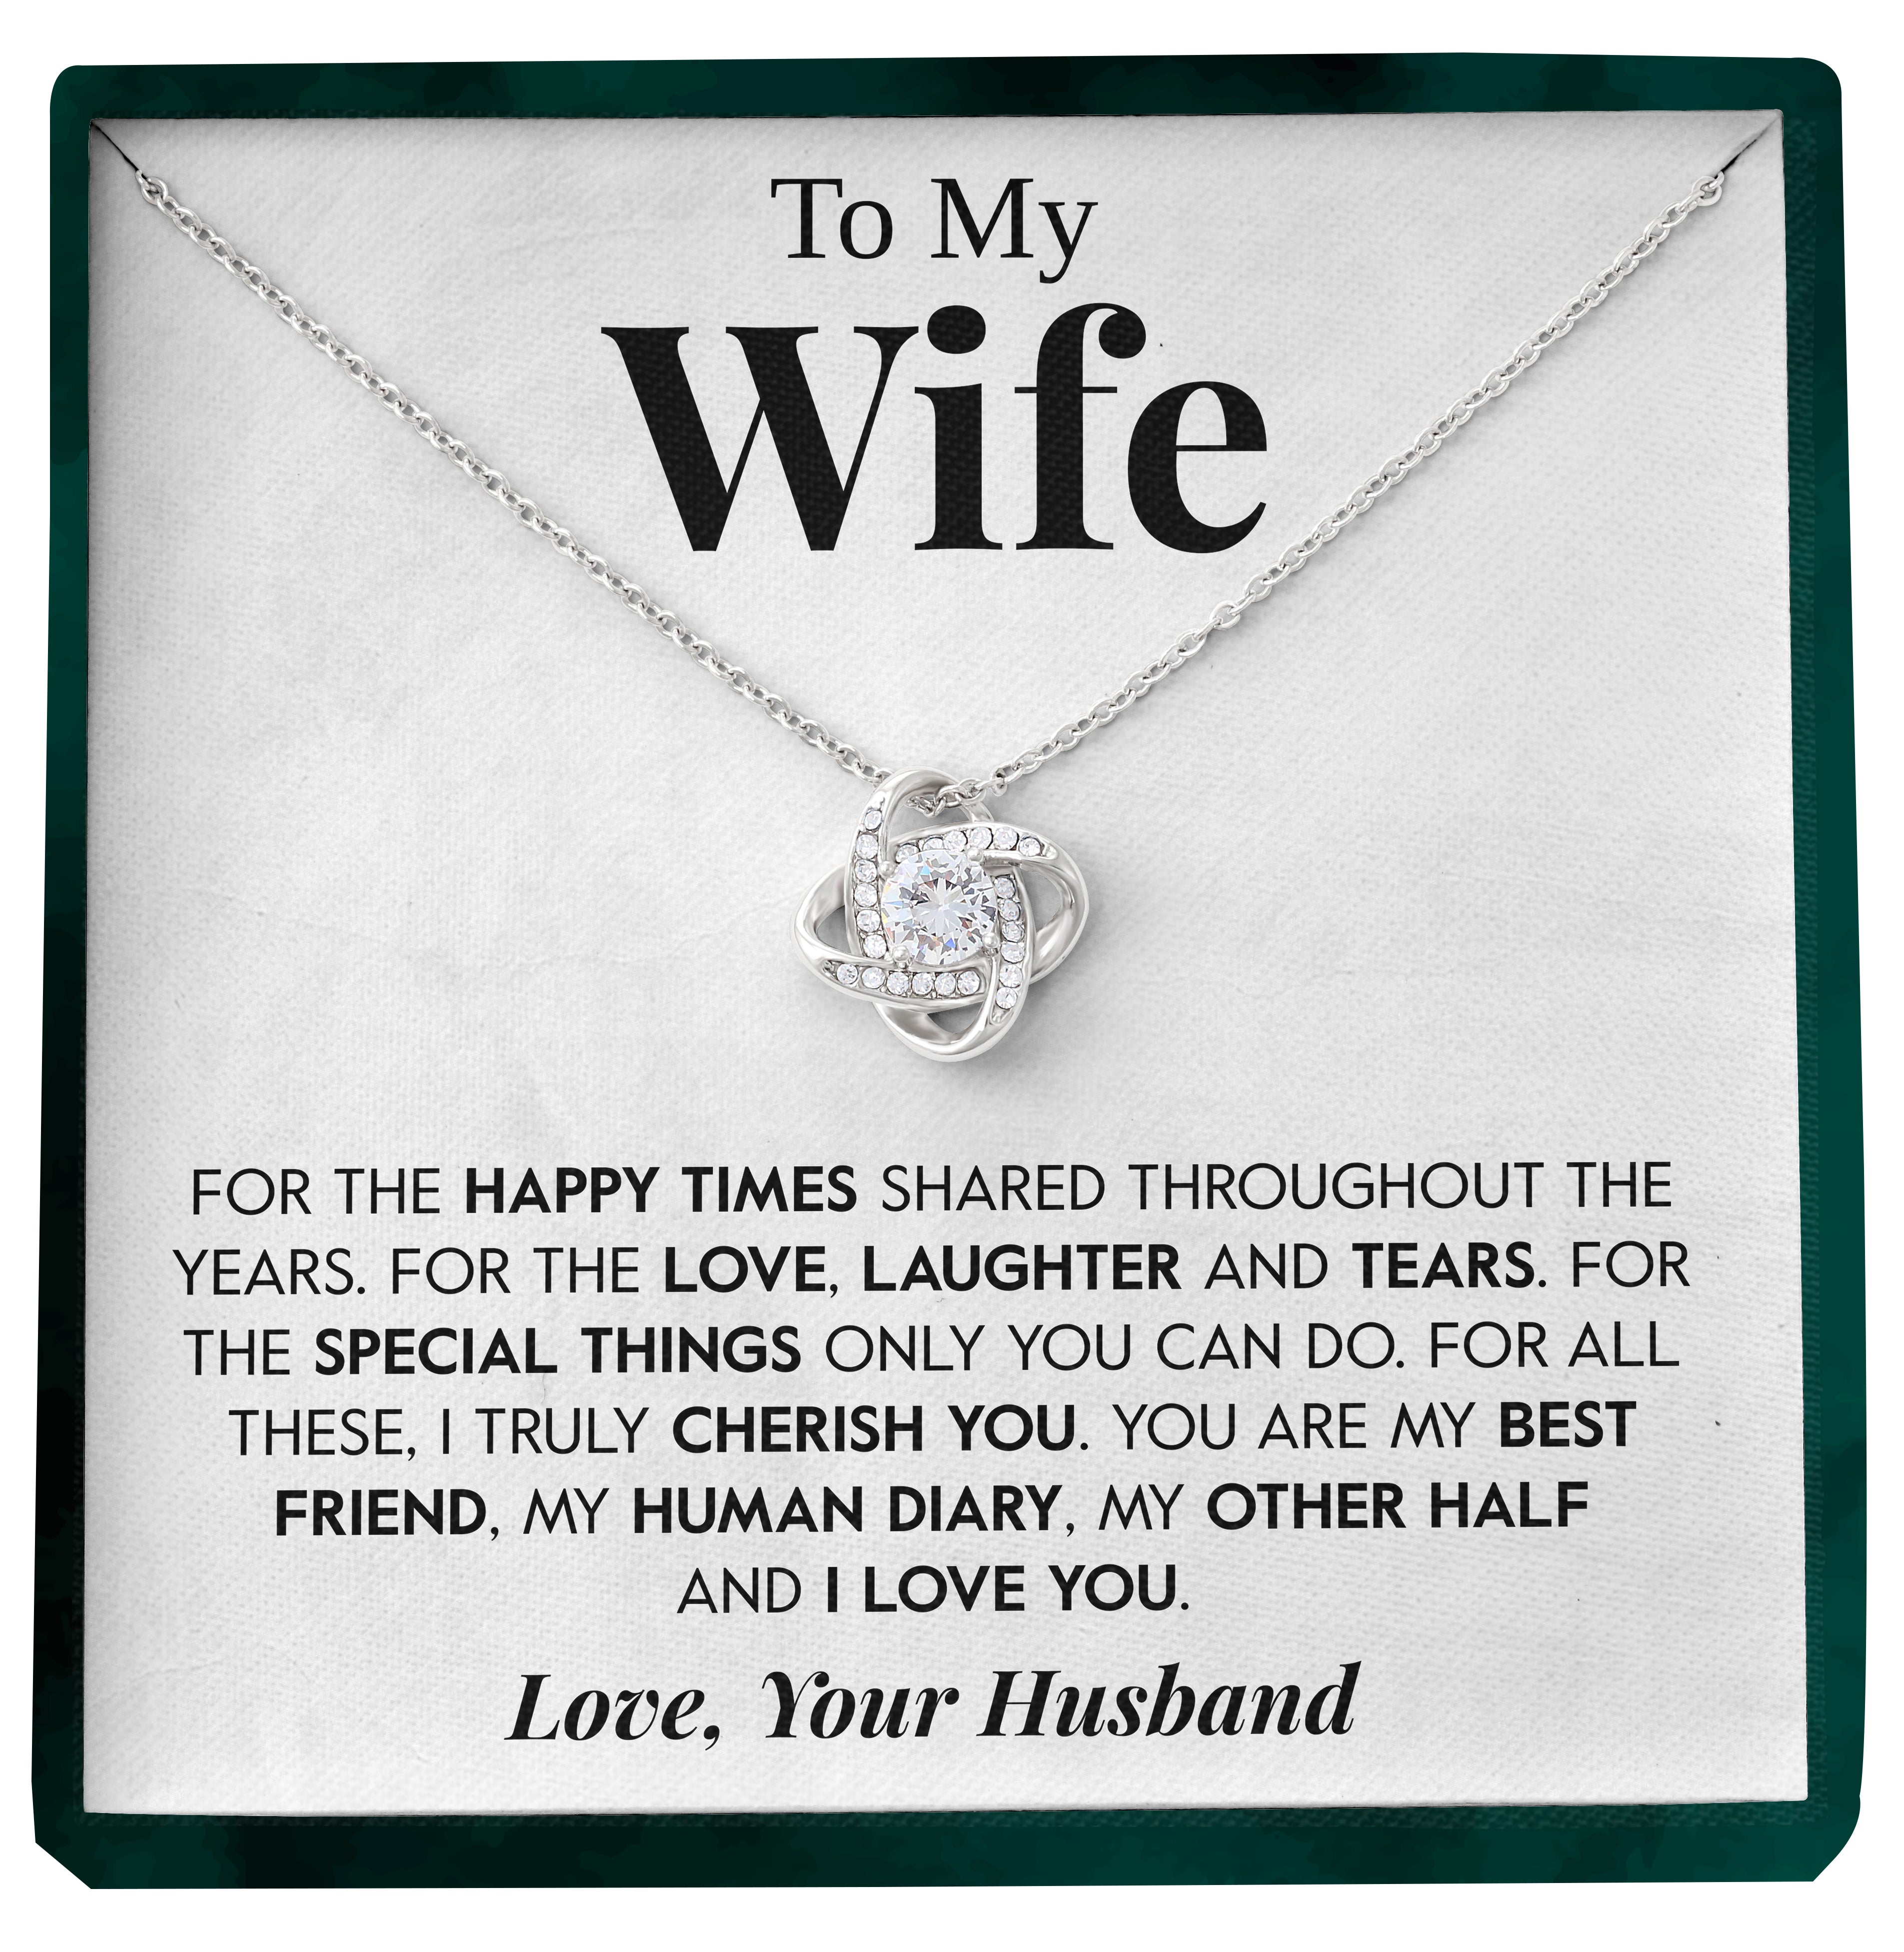 To My Wife | "My Other Half" | Love Knot Necklace